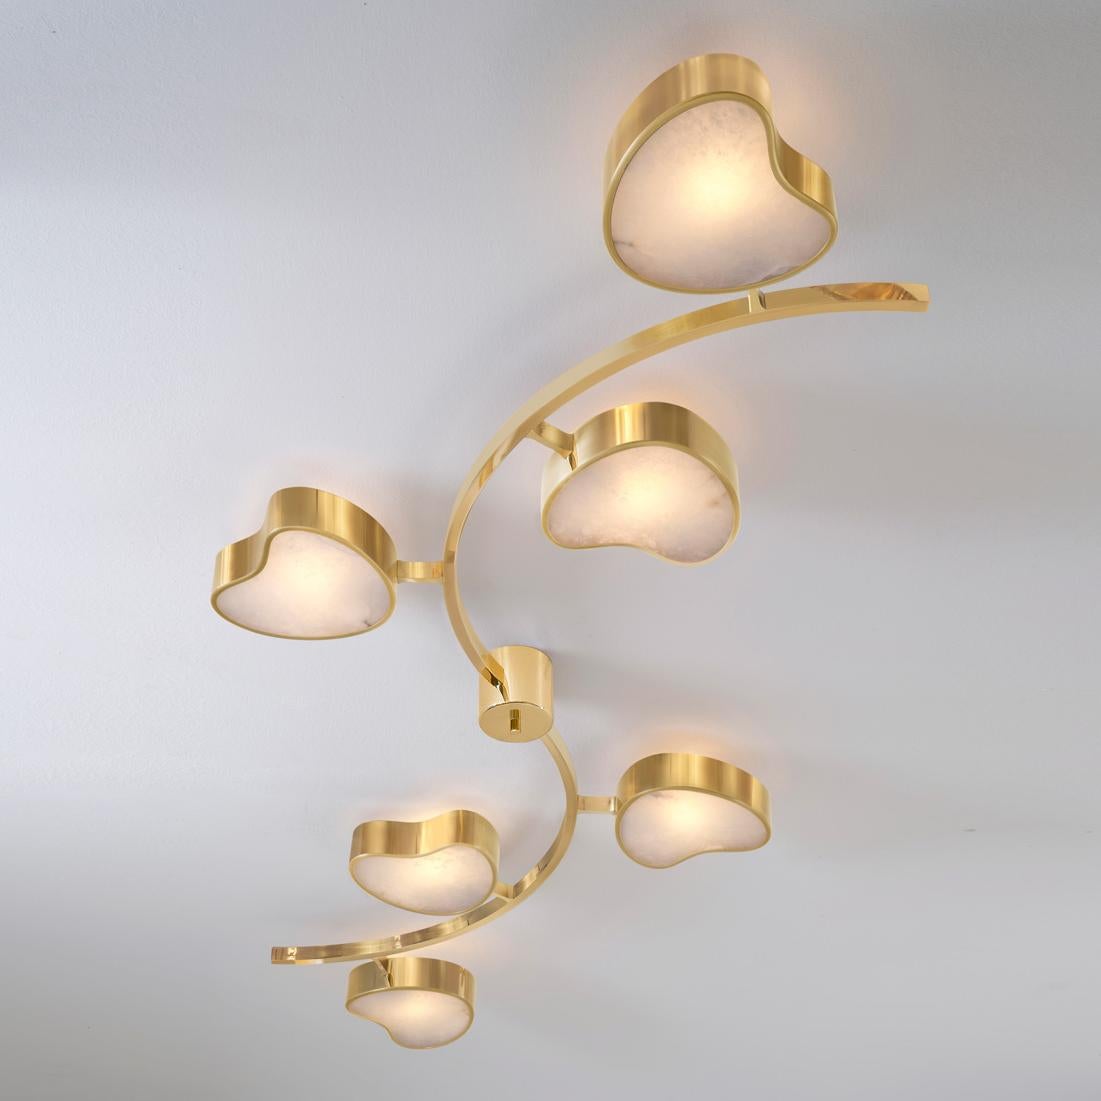 Modern Cuore N.6 Ceiling Light by Gaspare Asaro. Peltro and Bronze Finish For Sale